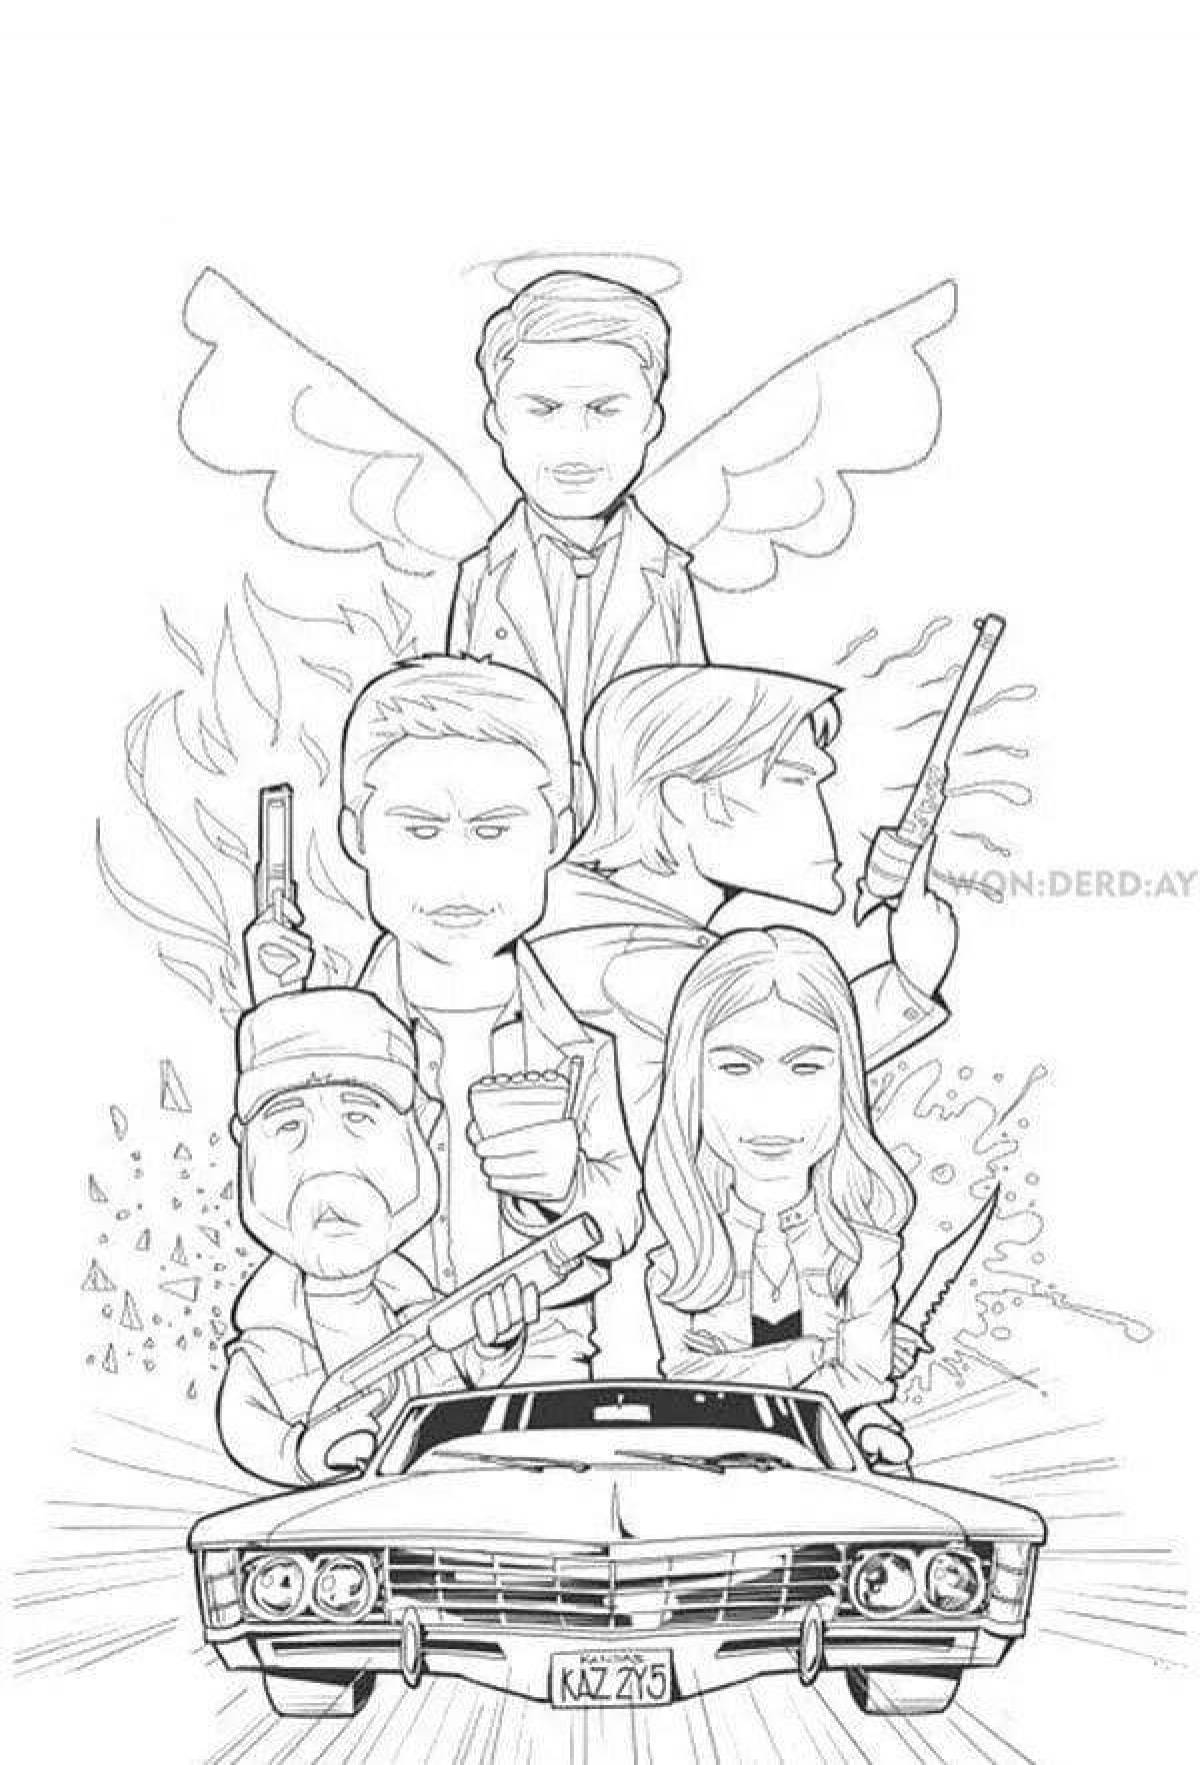 Academy of the Supernatural fun coloring book